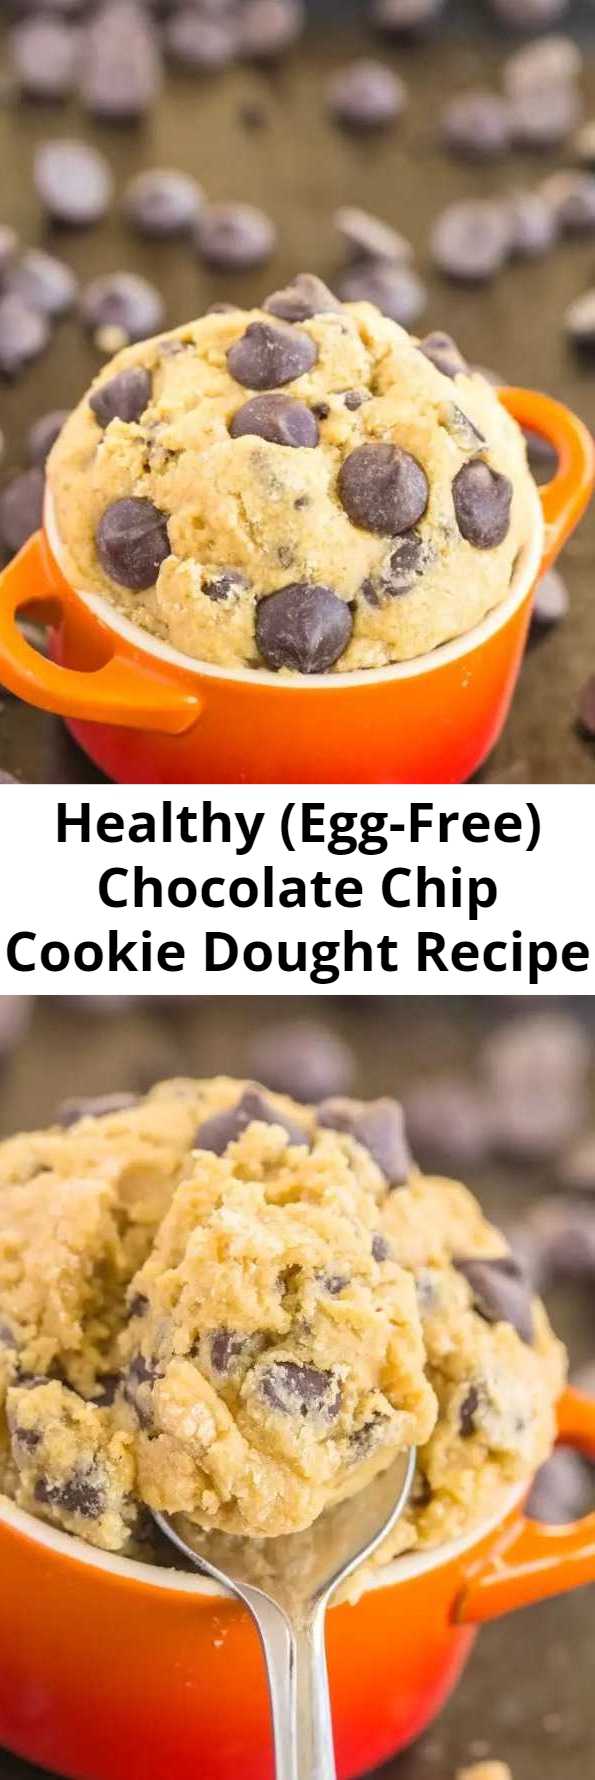 Healthy (Egg-Free) Chocolate Chip Cookie Dought Recipe - Smooth, creamy and ready in just five minutes, this healthy classic cookie dough for one is the ultimate snack or healthy dessert to have on hand! With no butter, flour, eggs, refined sugar or oil, it's a much healthier twist on the classic and naturally gluten-free, vegan, paleo, dairy free and with a high protein option!